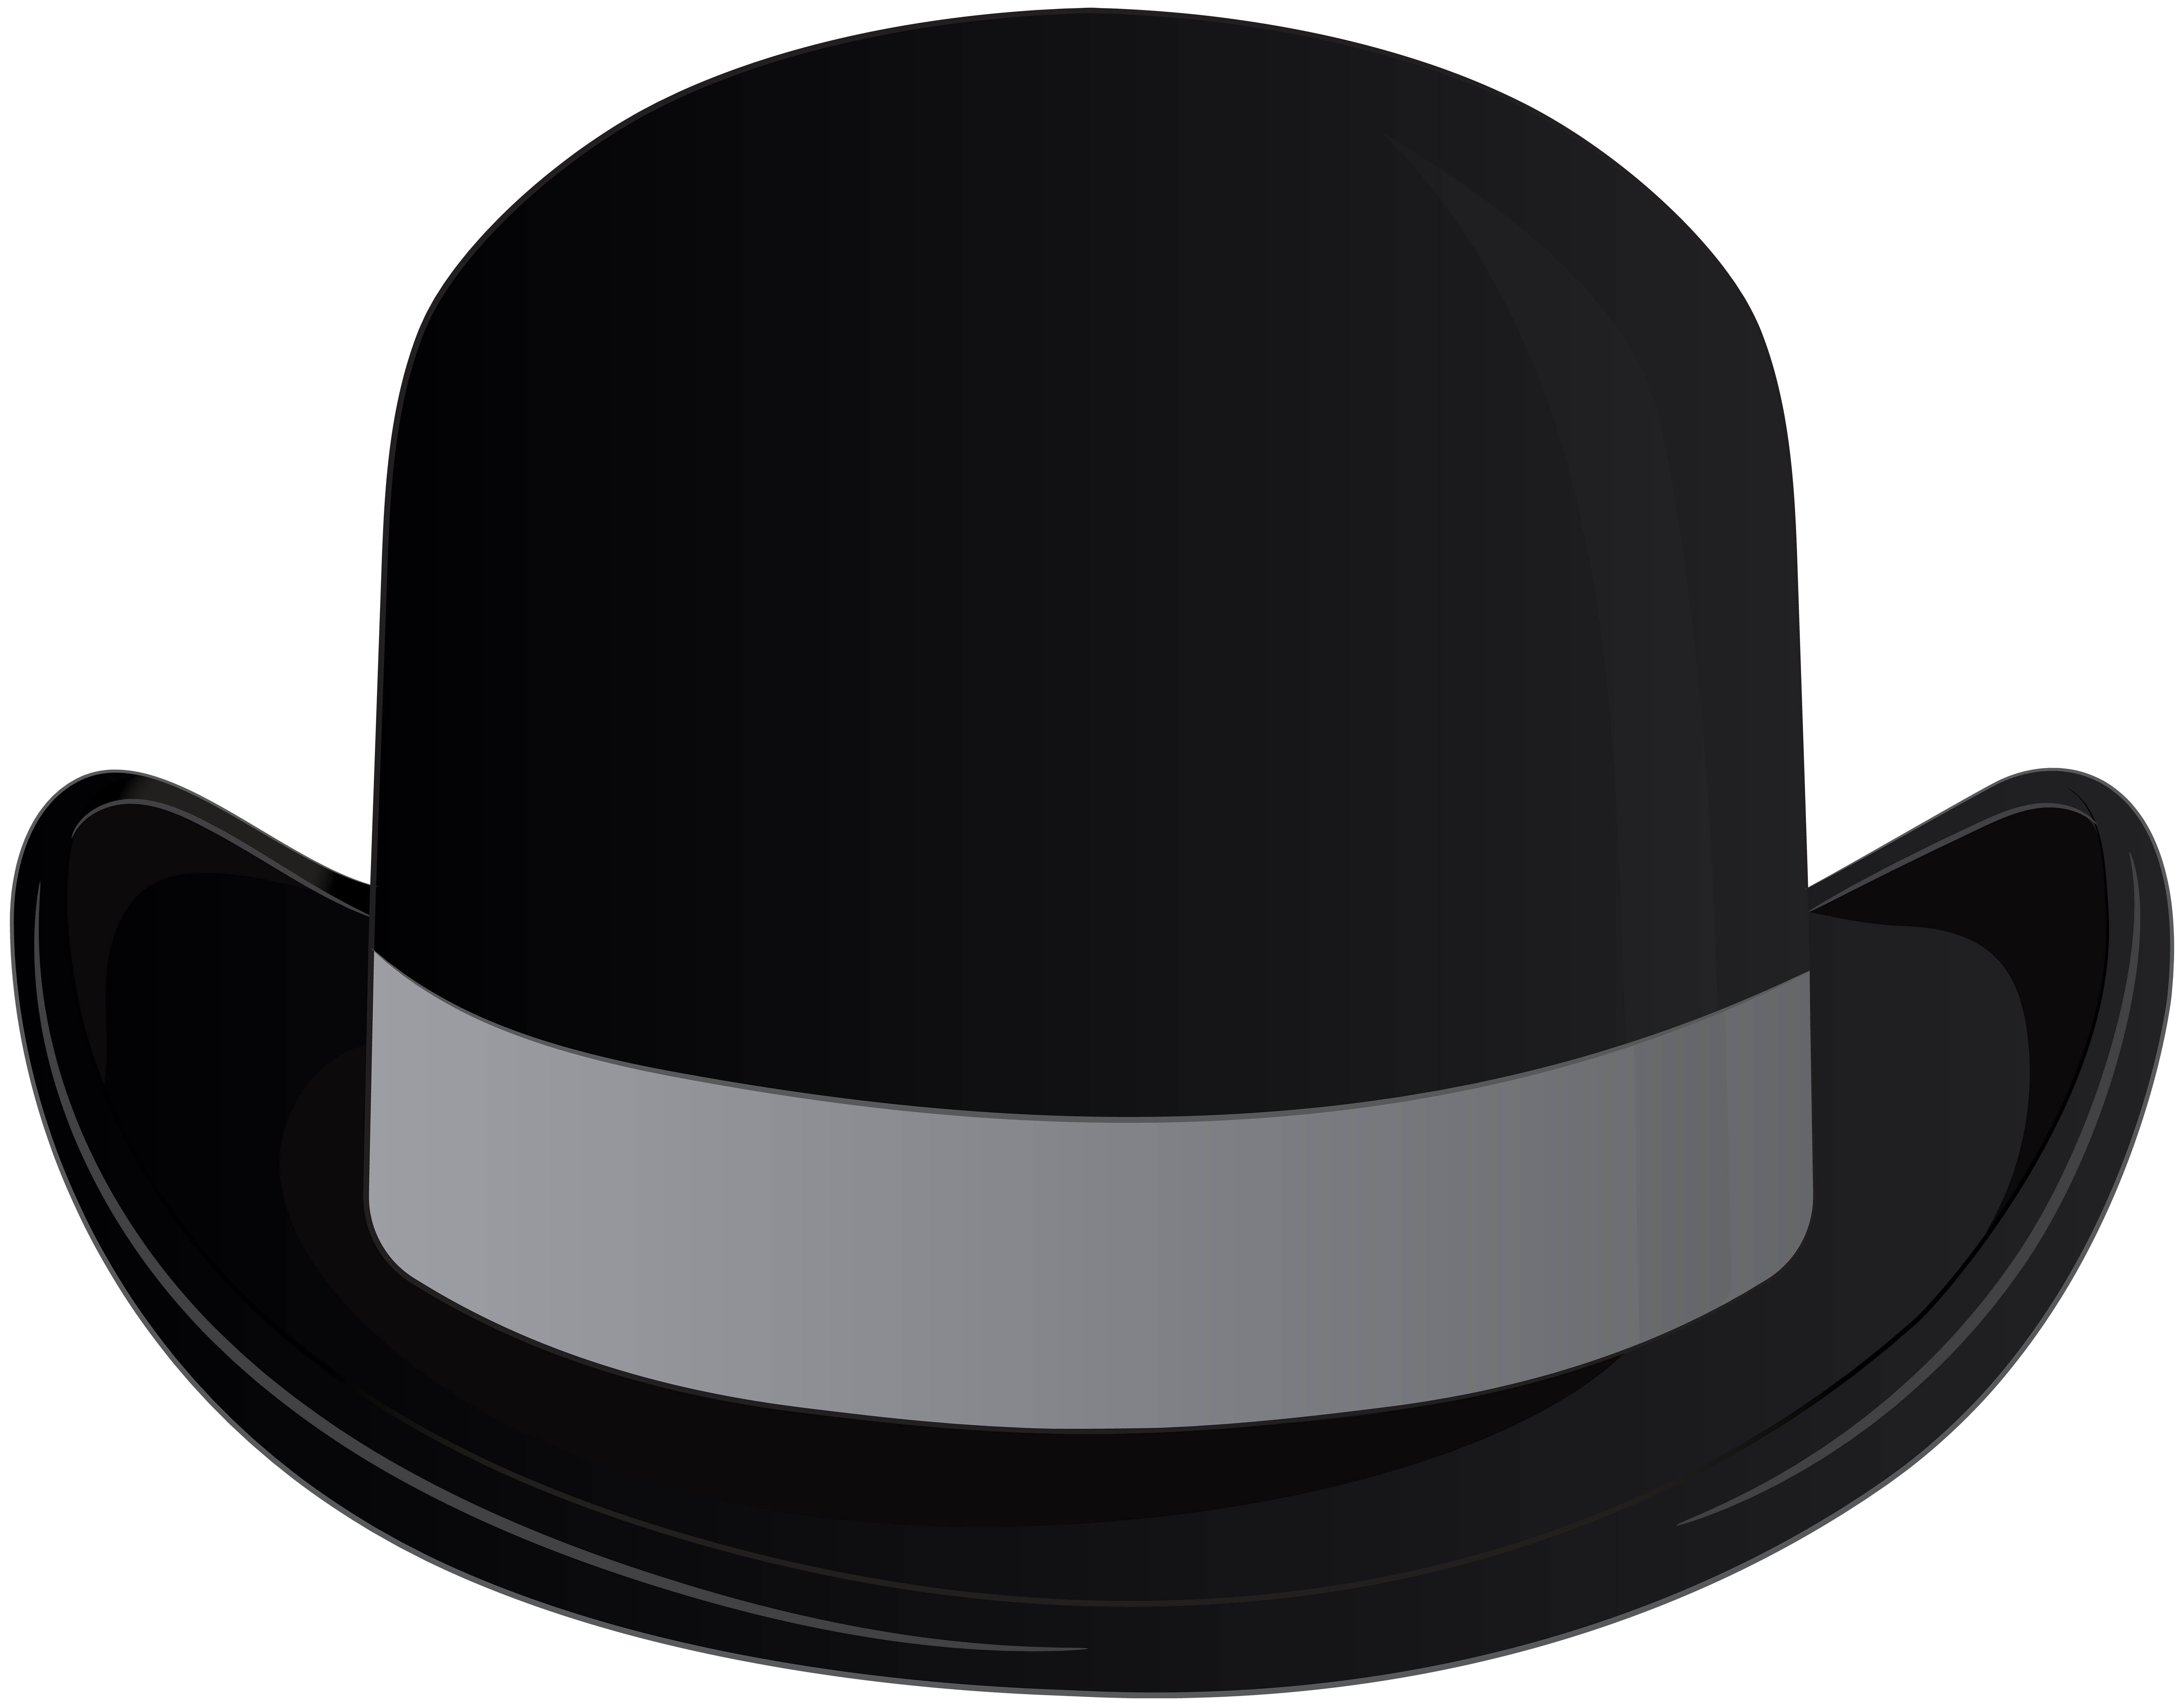 Bowler Hat Transparent Clip Art PNG Image | Gallery Yopriceville - High ...